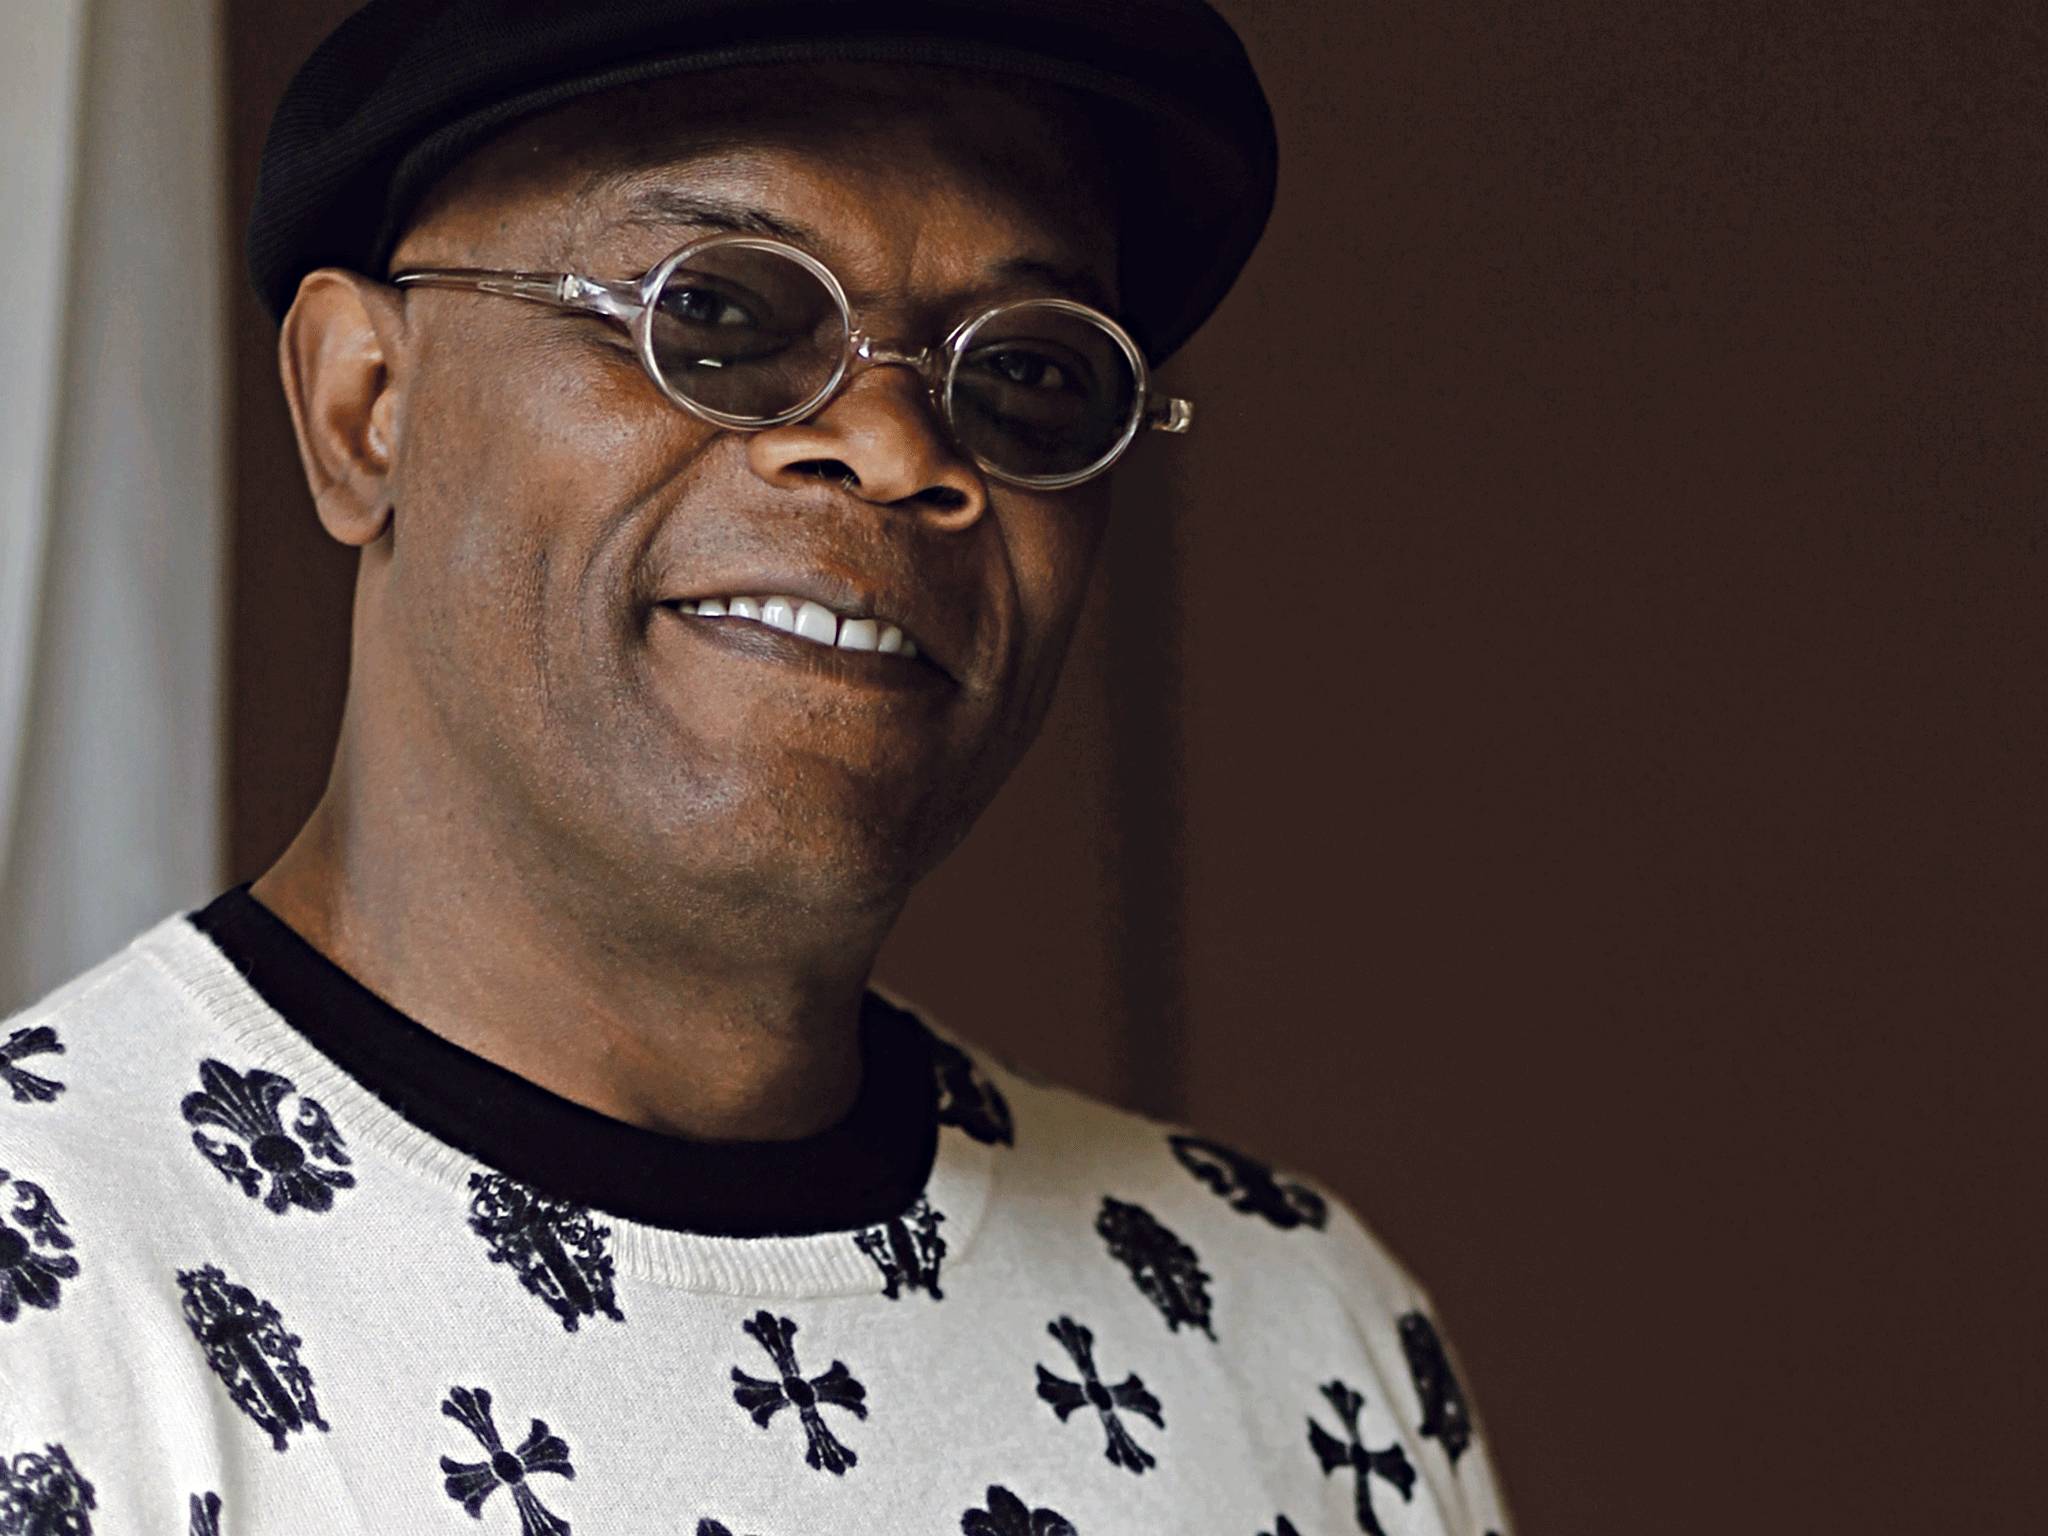 Samuel L Jackson disillusioned with President Obama: 'Be a leader